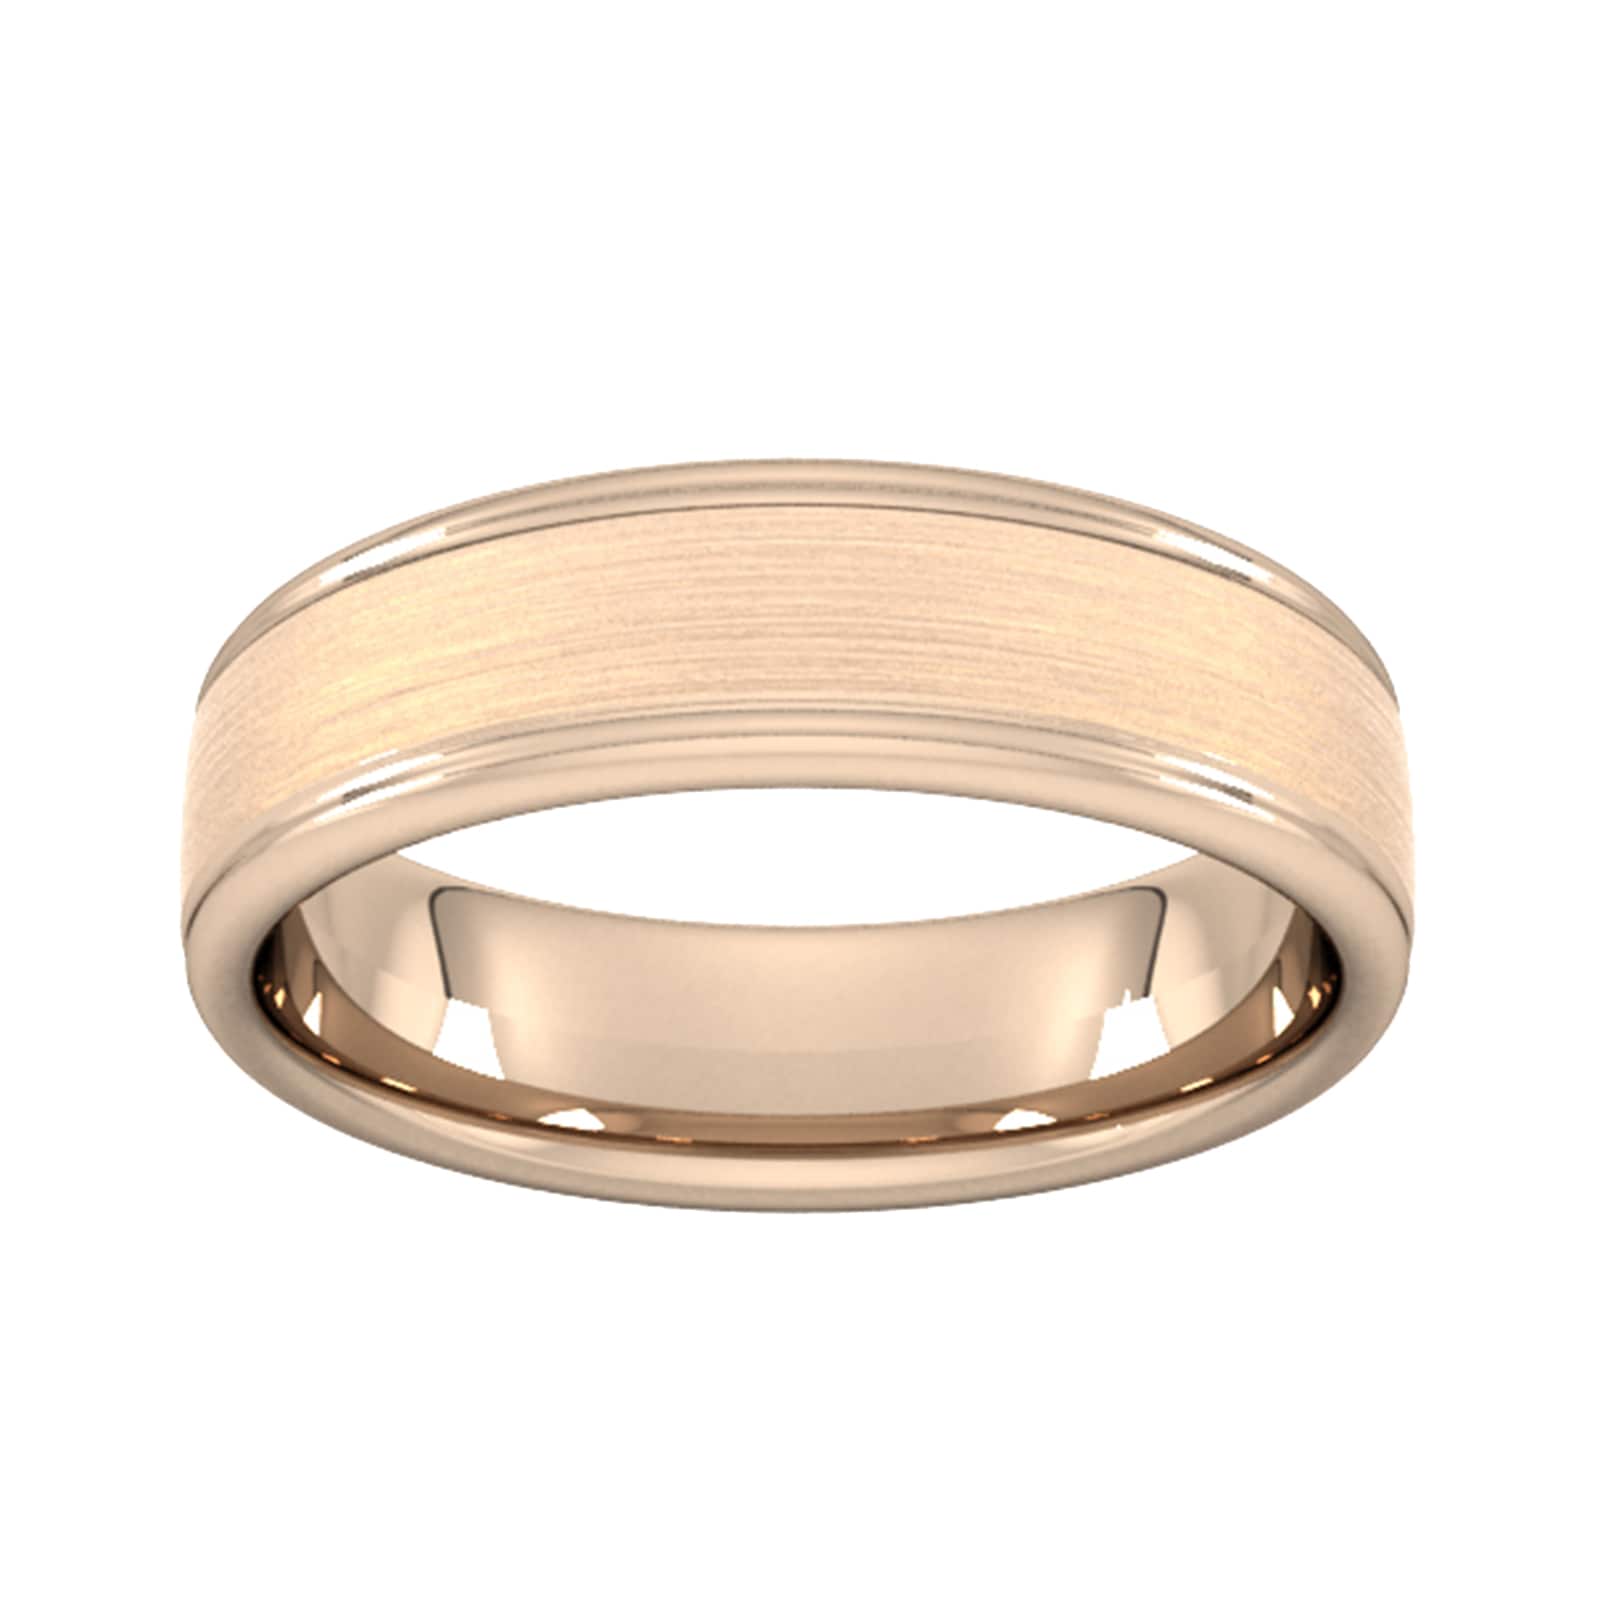 6mm Flat Court Heavy Matt Centre With Grooves Wedding Ring In 9 Carat Rose Gold - Ring Size I